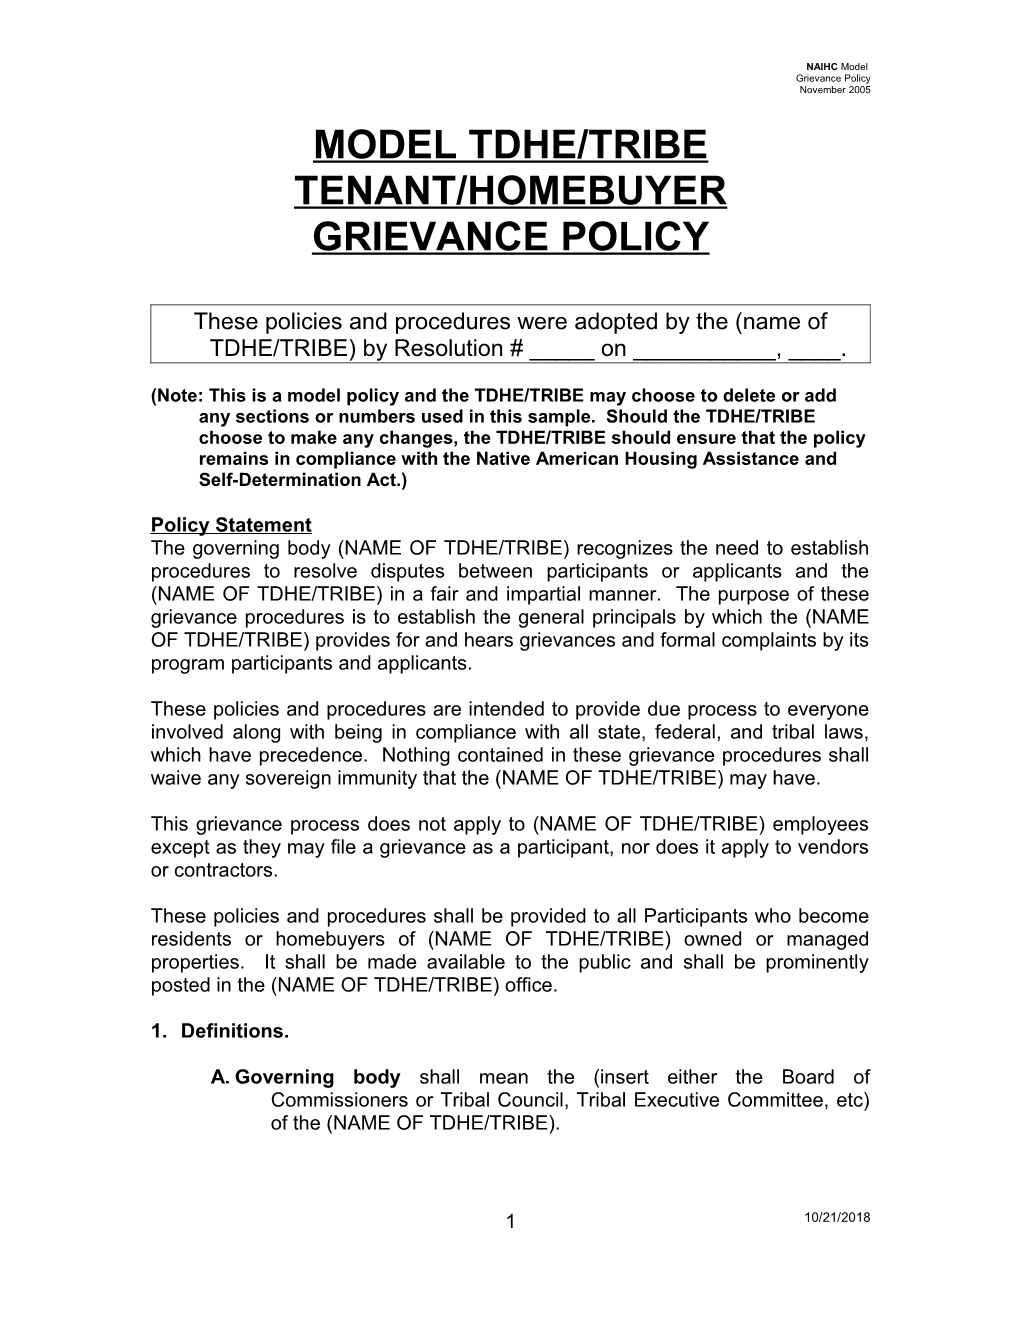 Tenant/Homebuyer Grievance Policy